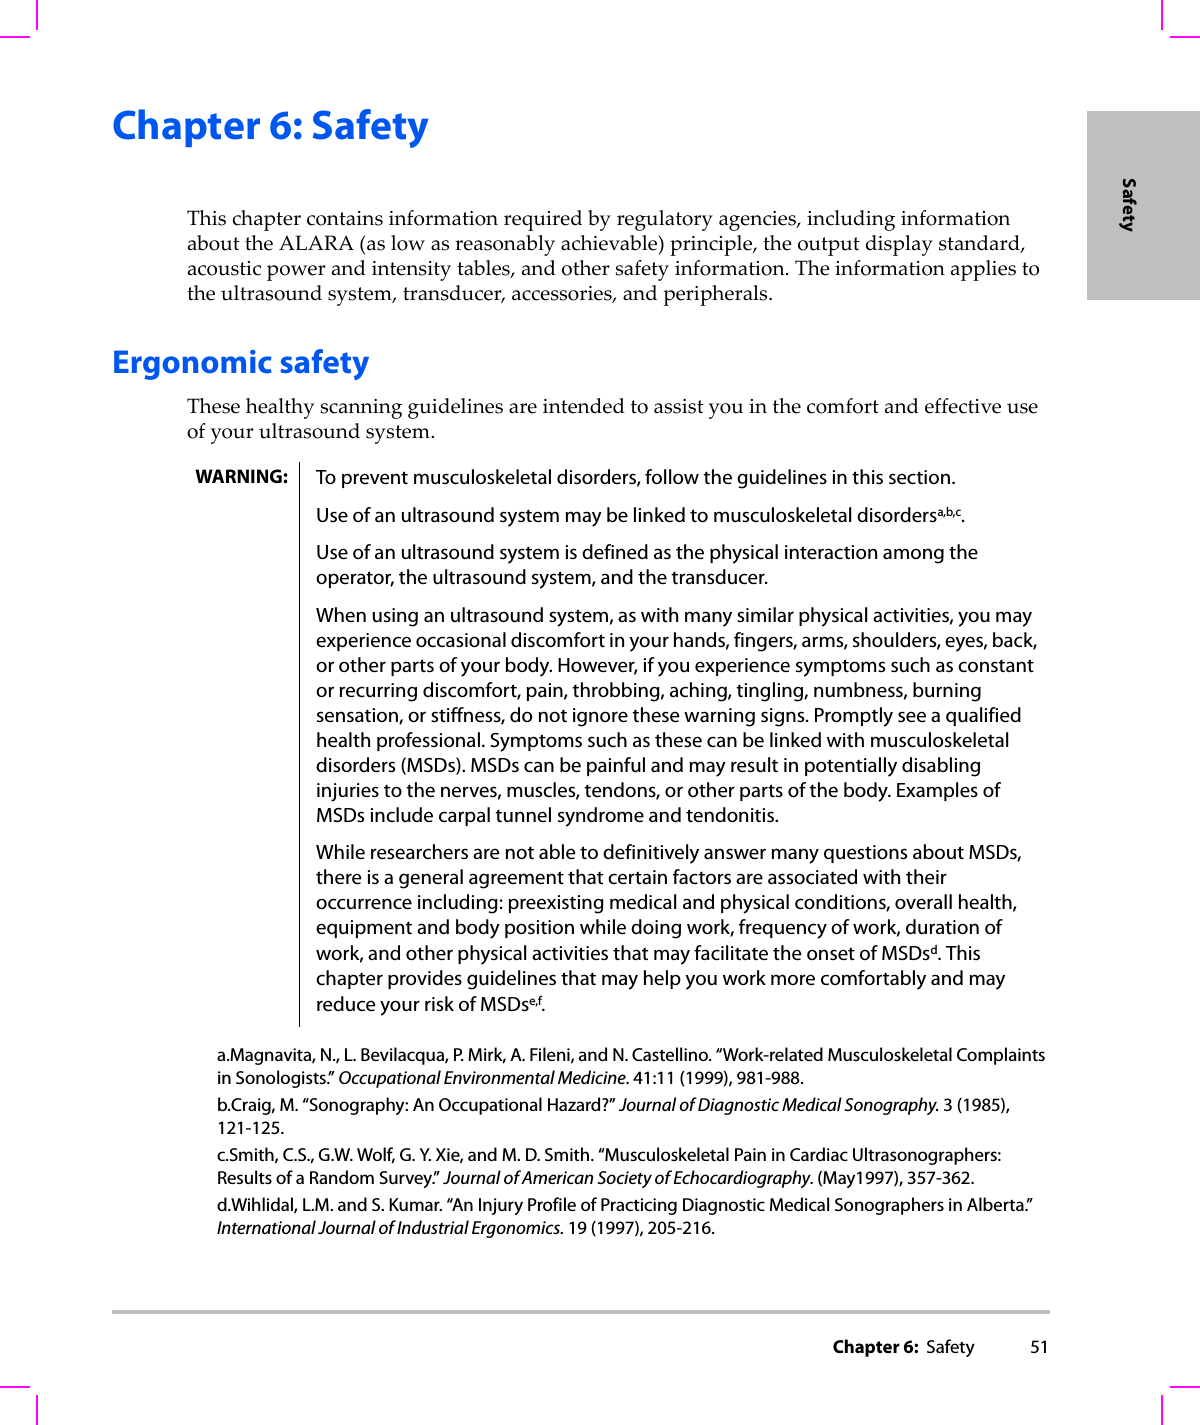 Chapter 6:  Safety 51SafetyChapter 6: SafetyThischaptercontainsinformationrequiredbyregulatoryagencies,includinginformationabouttheALARA(aslowasreasonablyachievable)principle,theoutputdisplaystandard,acousticpowerandintensitytables,andothersafetyinformation.Theinformationappliestotheultrasoundsystem,transducer,accessories,andperipherals.Ergonomic safetyThesehealthyscanningguidelinesareintendedtoassistyouinthecomfortandeffectiveuseofyourultrasoundsystem.WARNING: To prevent musculoskeletal disorders, follow the guidelines in this section.Use of an ultrasound system may be linked to musculoskeletal disordersa,b,c.Use of an ultrasound system is defined as the physical interaction among the operator, the ultrasound system, and the transducer.When using an ultrasound system, as with many similar physical activities, you may experience occasional discomfort in your hands, fingers, arms, shoulders, eyes, back, or other parts of your body. However, if you experience symptoms such as constant or recurring discomfort, pain, throbbing, aching, tingling, numbness, burning sensation, or stiffness, do not ignore these warning signs. Promptly see a qualified health professional. Symptoms such as these can be linked with musculoskeletal disorders (MSDs). MSDs can be painful and may result in potentially disabling injuries to the nerves, muscles, tendons, or other parts of the body. Examples of MSDs include carpal tunnel syndrome and tendonitis.While researchers are not able to definitively answer many questions about MSDs, there is a general agreement that certain factors are associated with their occurrence including: preexisting medical and physical conditions, overall health, equipment and body position while doing work, frequency of work, duration of work, and other physical activities that may facilitate the onset of MSDsd. This chapter provides guidelines that may help you work more comfortably and may reduce your risk of MSDse,f.a.Magnavita, N., L. Bevilacqua, P. Mirk, A. Fileni, and N. Castellino. “Work-related Musculoskeletal Complaints in Sonologists.” Occupational Environmental Medicine. 41:11 (1999), 981-988.b.Craig, M. “Sonography: An Occupational Hazard?” Journal of Diagnostic Medical Sonography. 3 (1985), 121-125.c.Smith, C.S., G.W. Wolf, G. Y. Xie, and M. D. Smith. “Musculoskeletal Pain in Cardiac Ultrasonographers: Results of a Random Survey.” Journal of American Society of Echocardiography. (May1997), 357-362.d.Wihlidal, L.M. and S. Kumar. “An Injury Profile of Practicing Diagnostic Medical Sonographers in Alberta.” International Journal of Industrial Ergonomics. 19 (1997), 205-216.